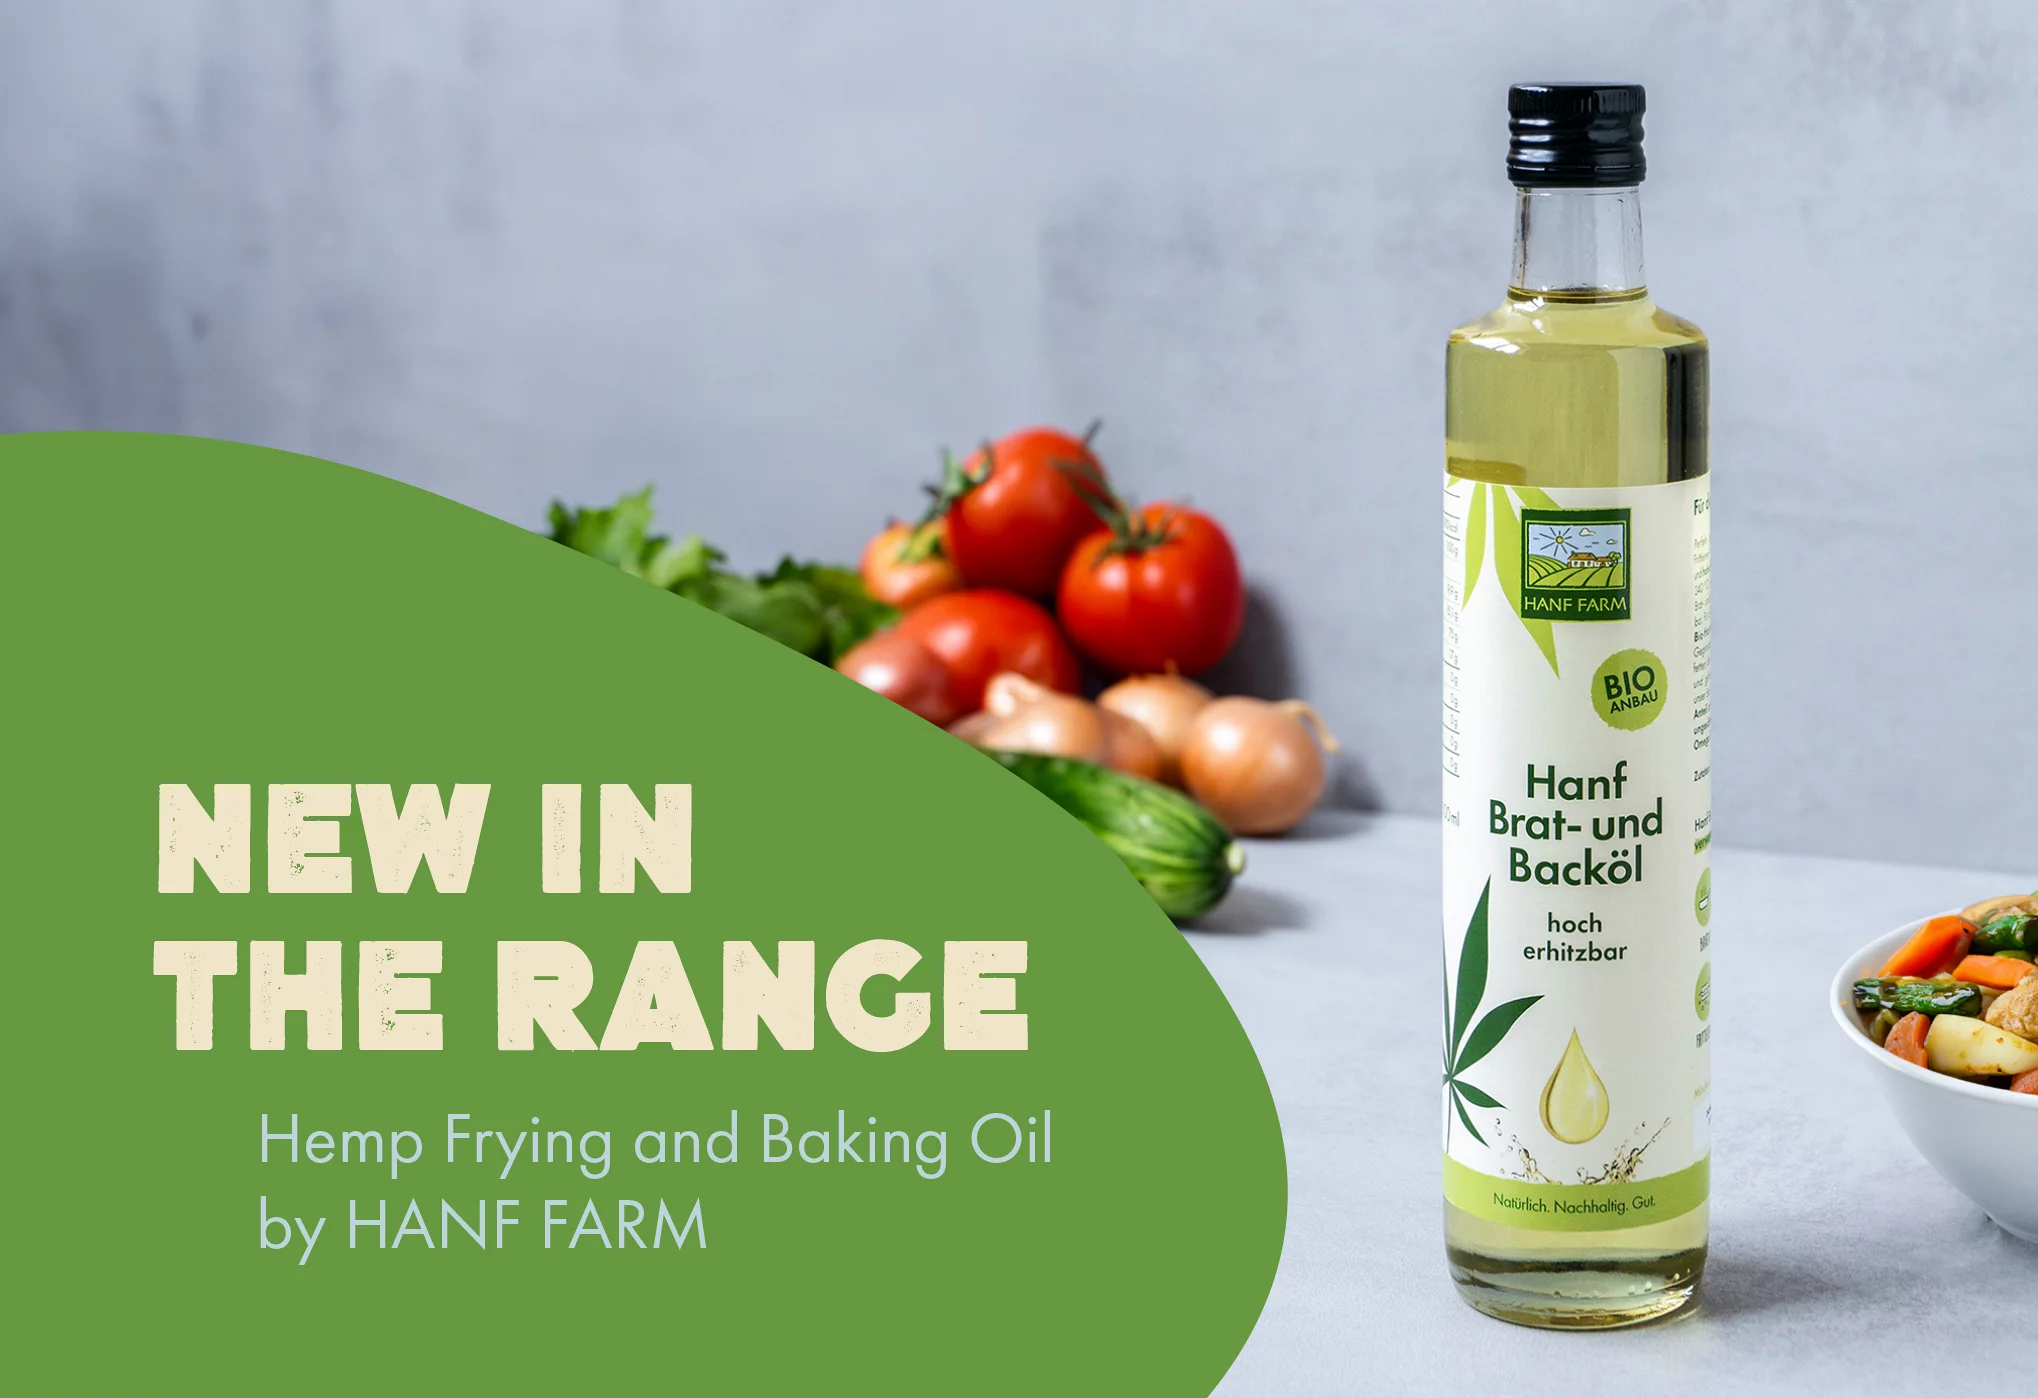 For the hot cuisine
Discover our organic hemp frying and baking oil in premium quality! It is perfect for frying, baking and deep-frying! Neutral flavour and high heatability make it versatile.